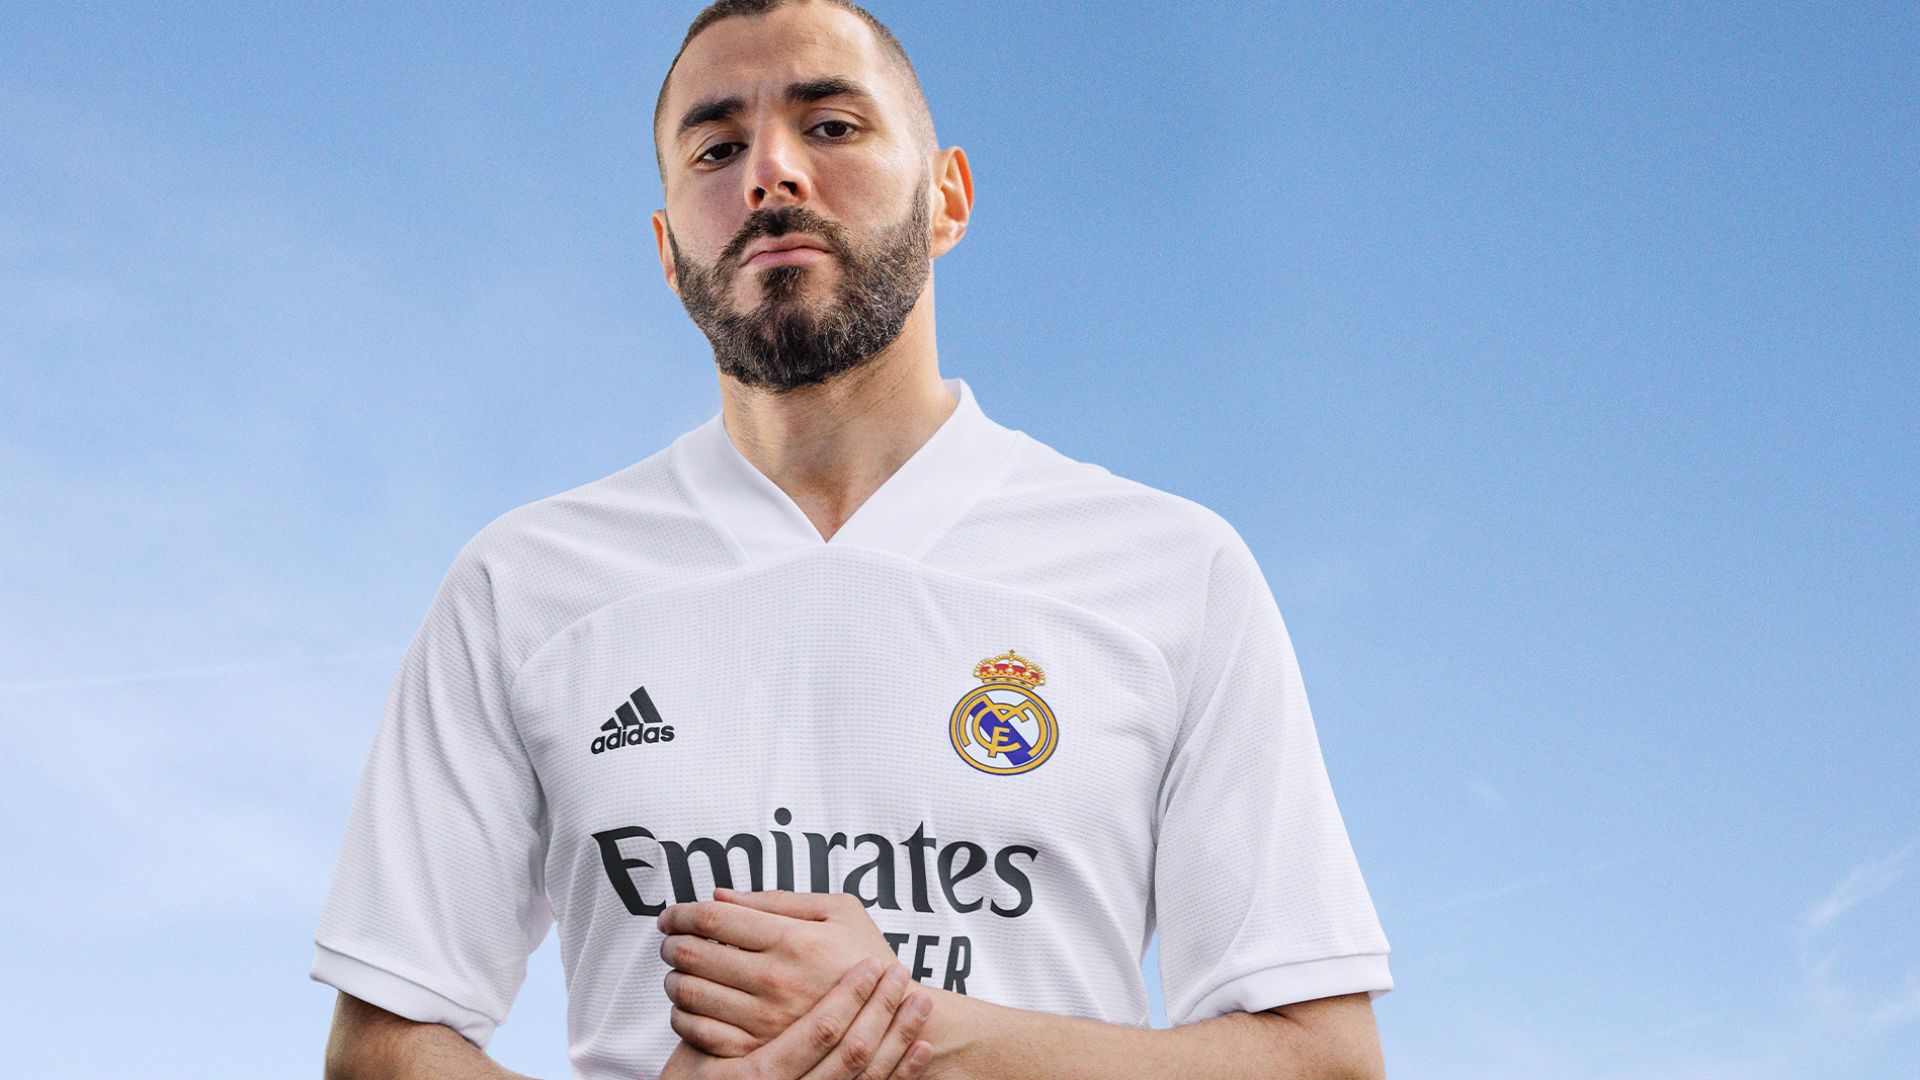 Real Madrid's 2020 21 Kit: New Home And Away Jersey Styles And Release Dates